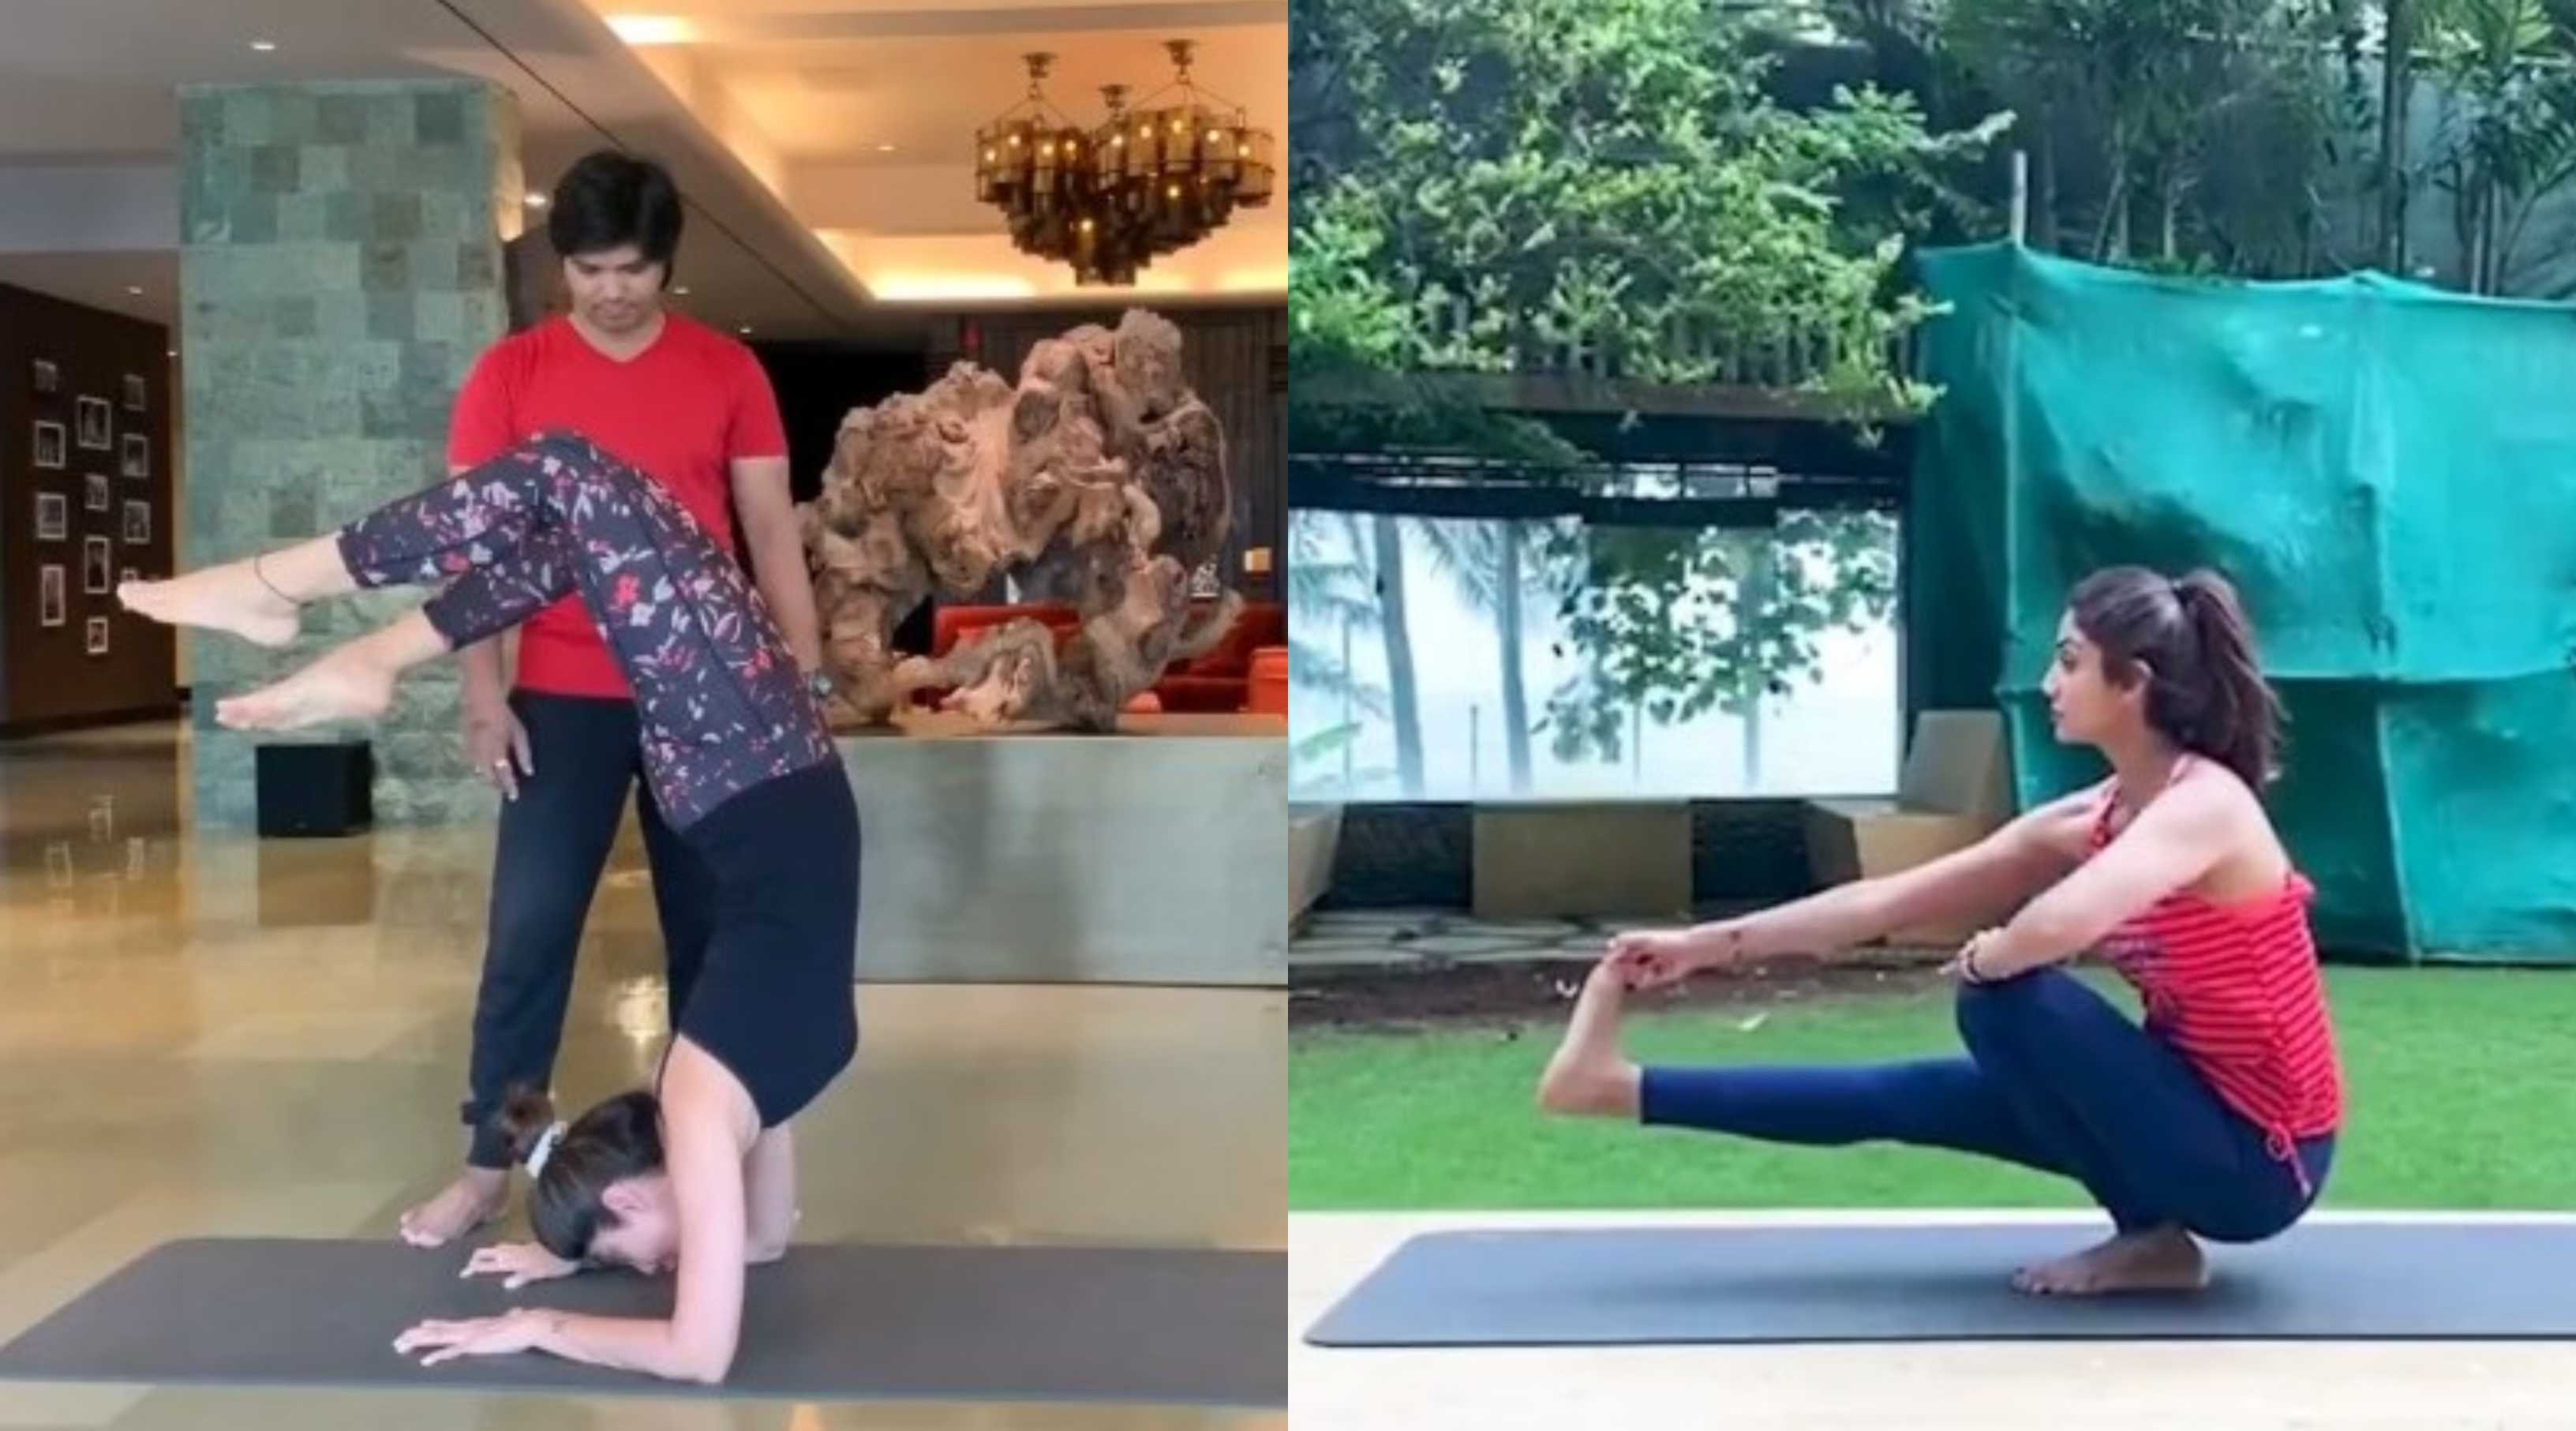 International Yoga Day 2022: 5 times Shilpa Shetty inspired us by acing difficult asanas